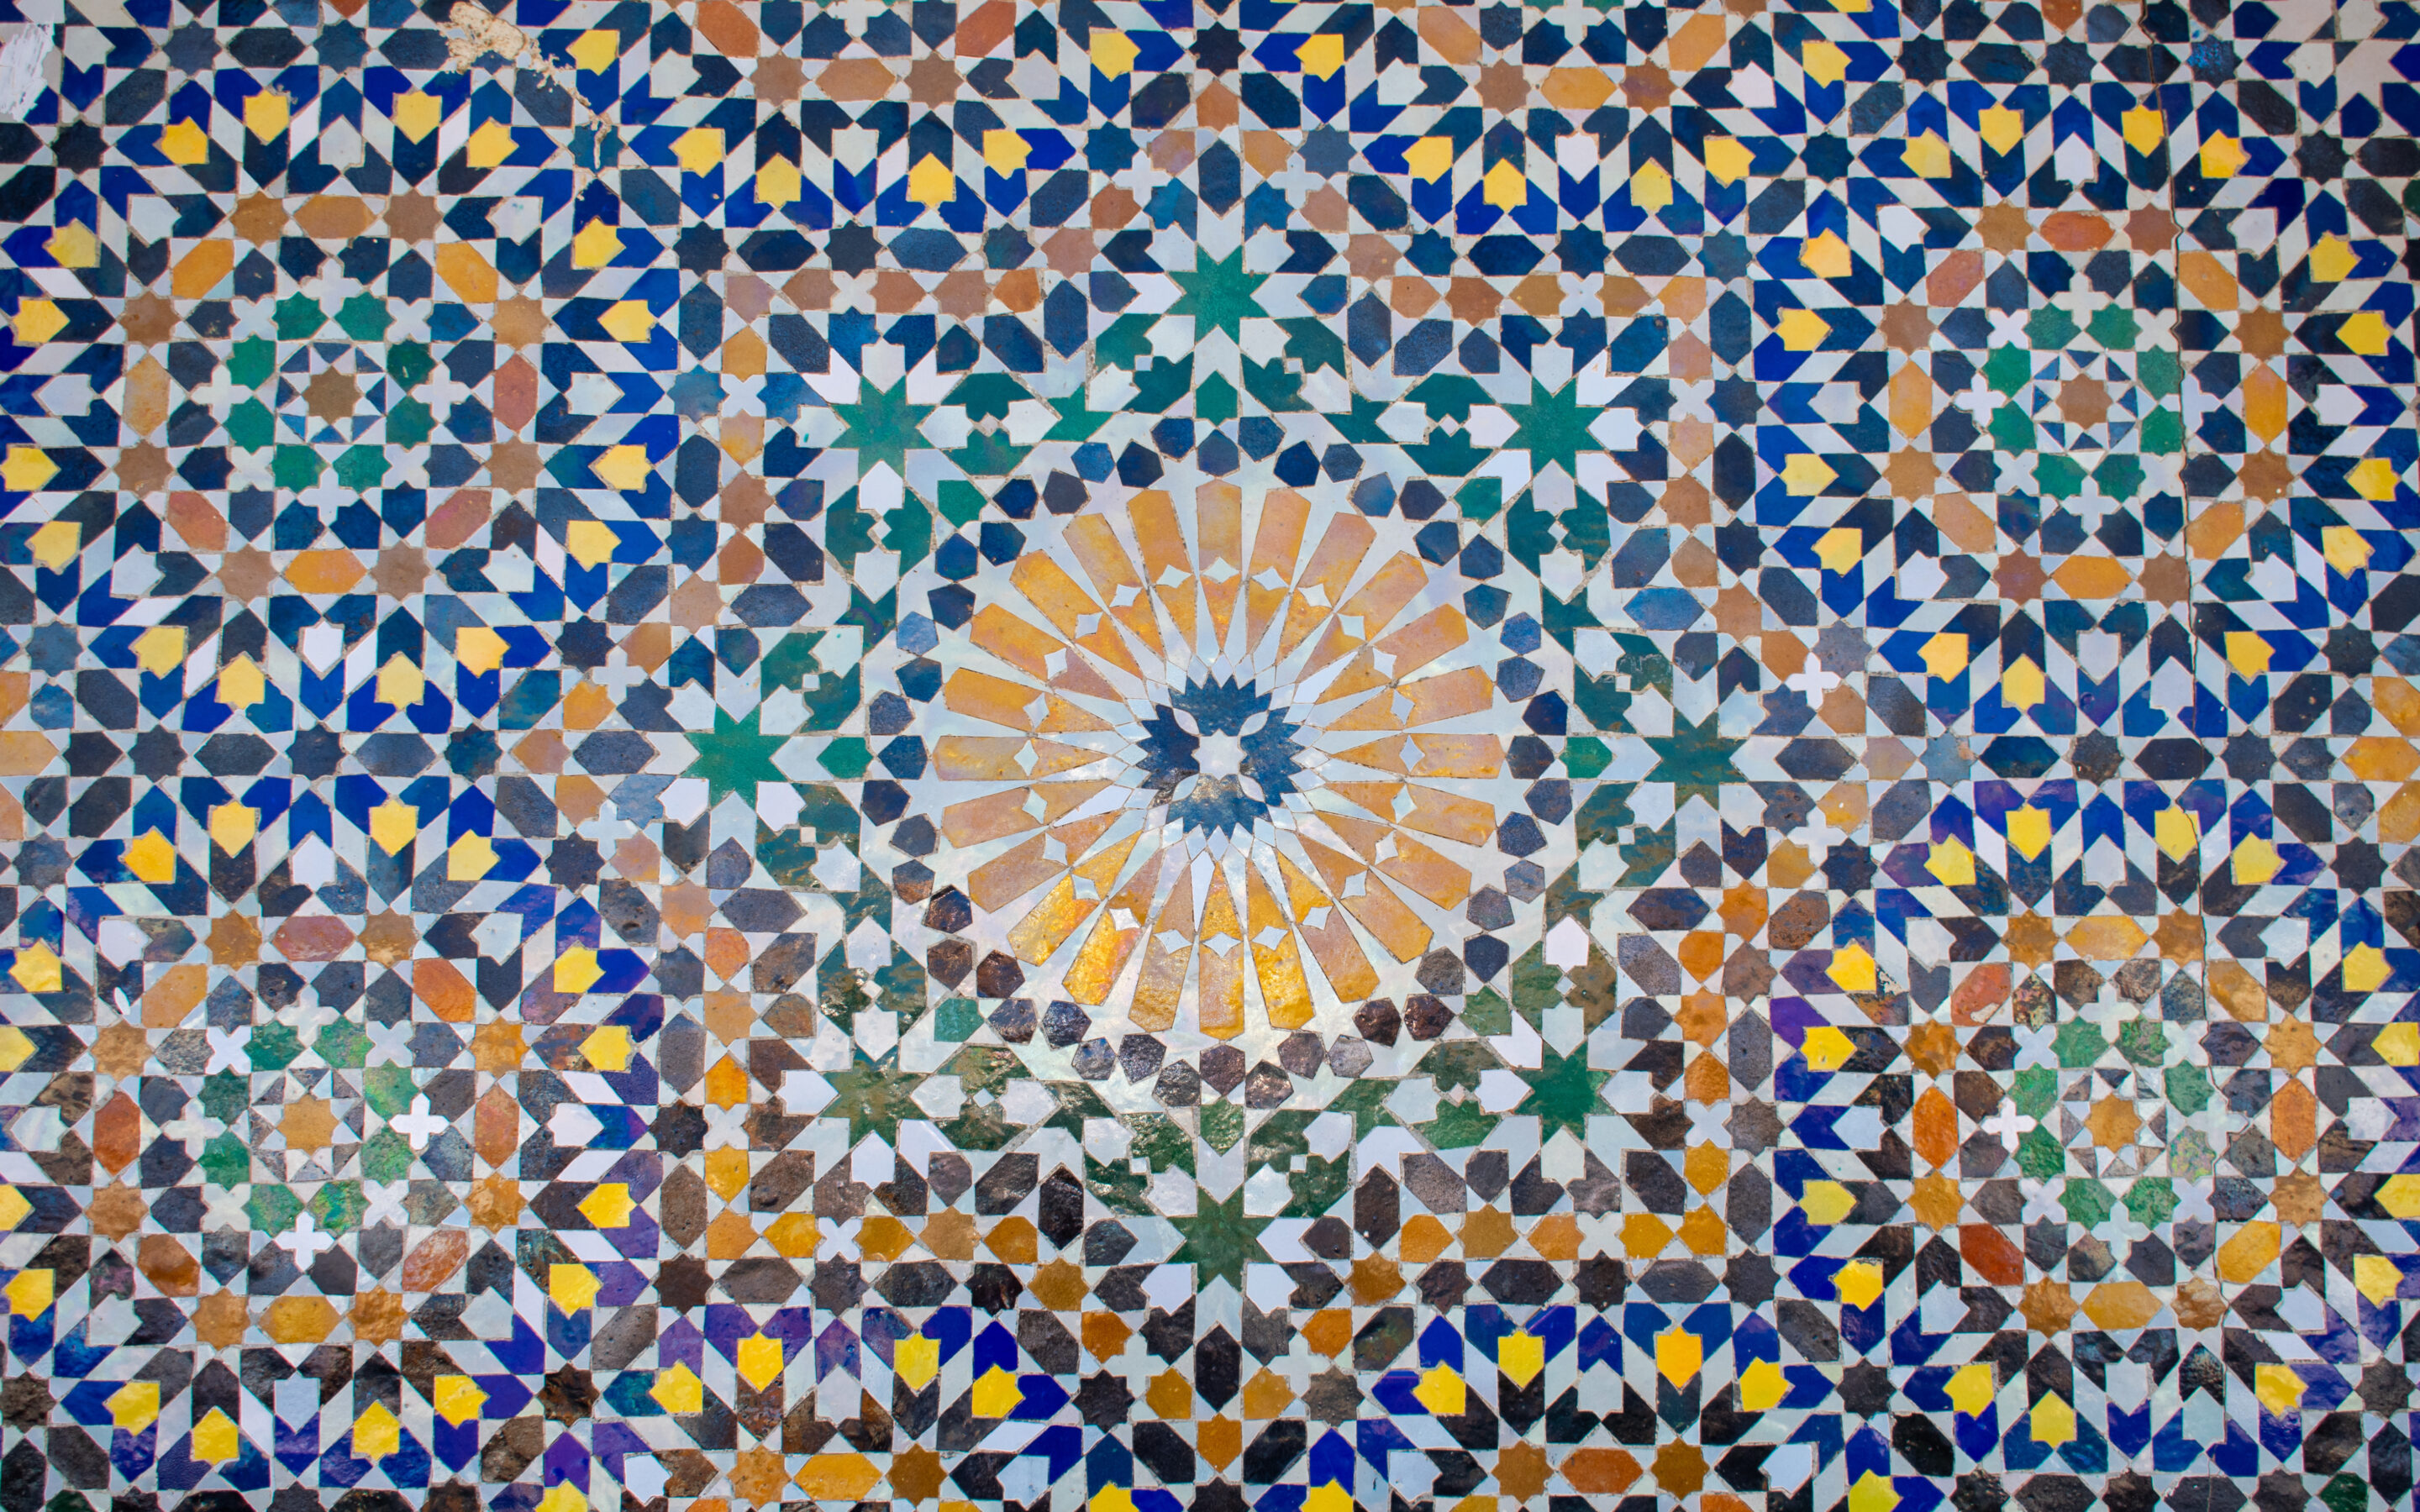 Moroccan Mosaic showing significance of small things